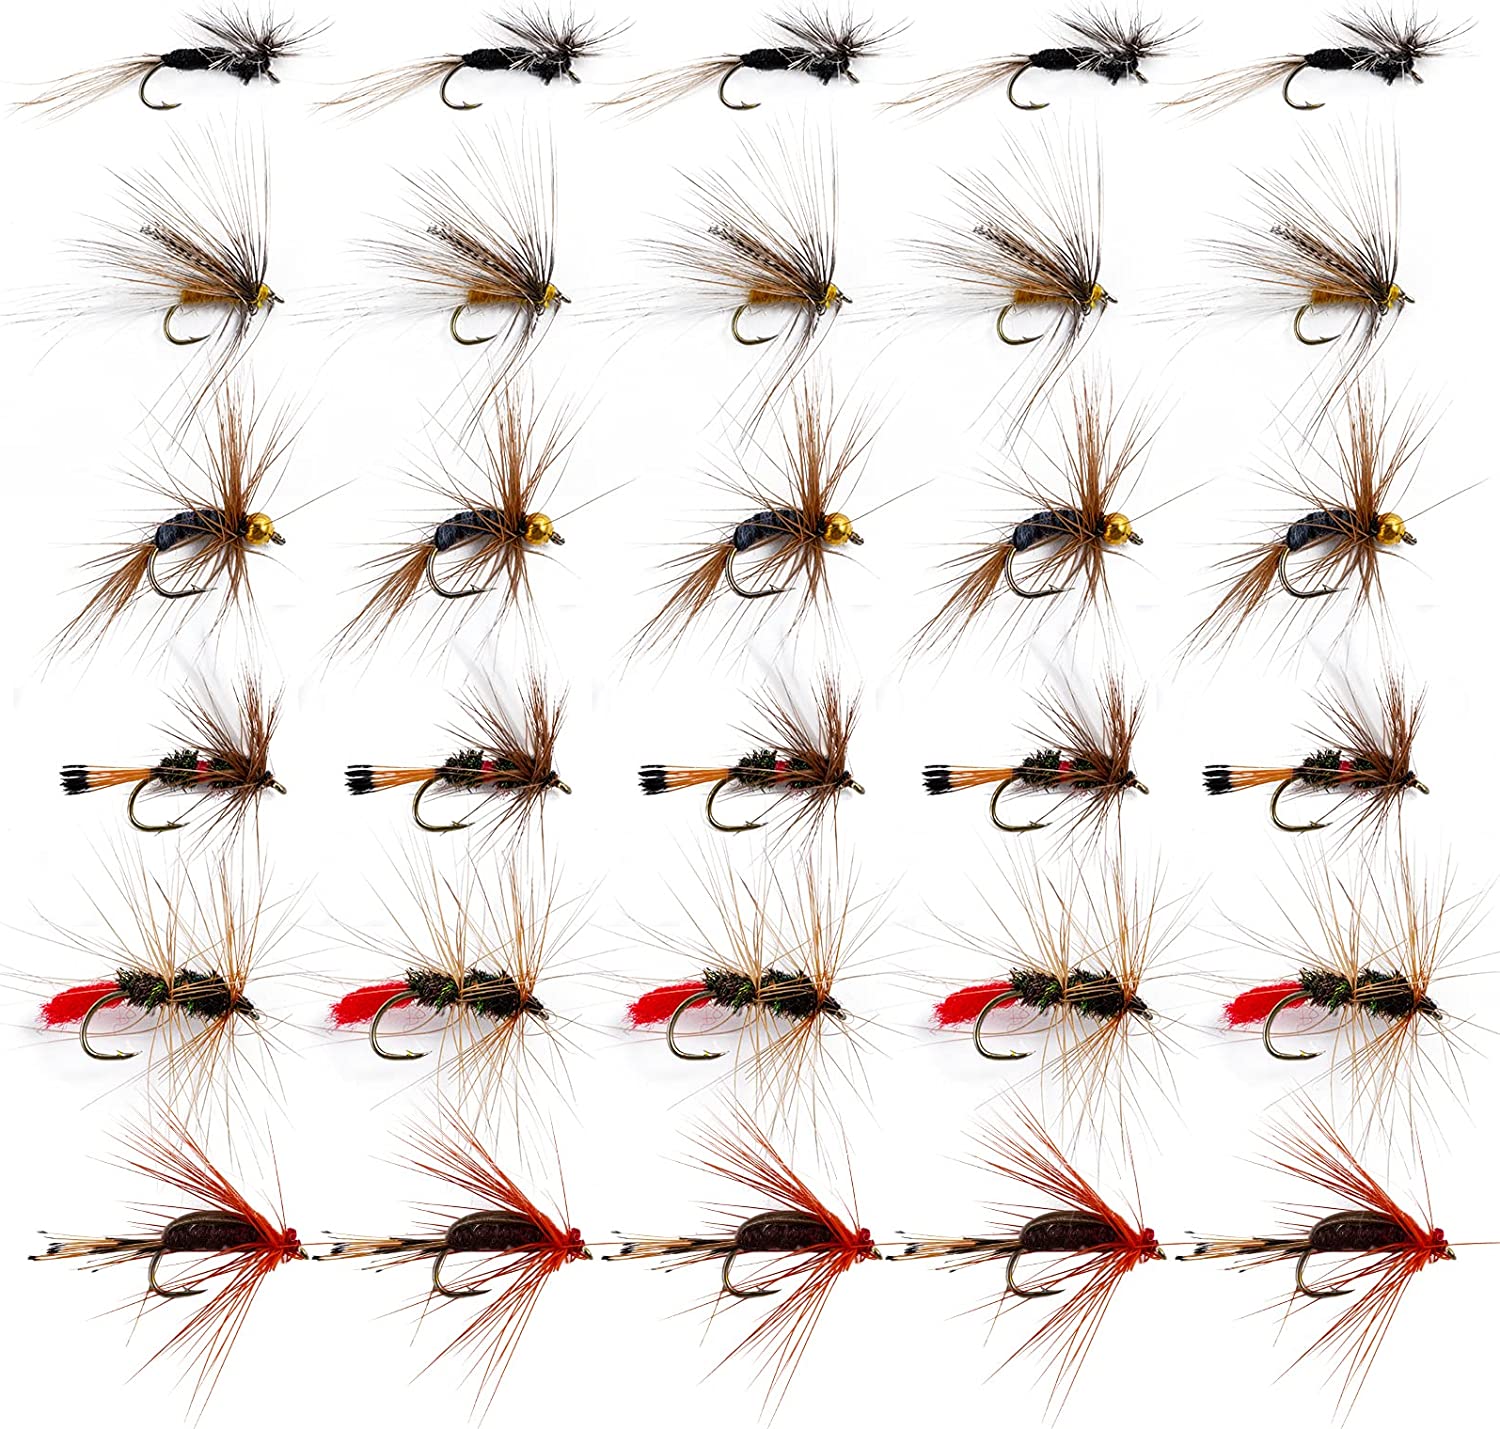  Fly Fishing Flies Realistic Dry Wet Nymph Trout Flies Hand  Tie Lures Kits 12/26/48 Pcs